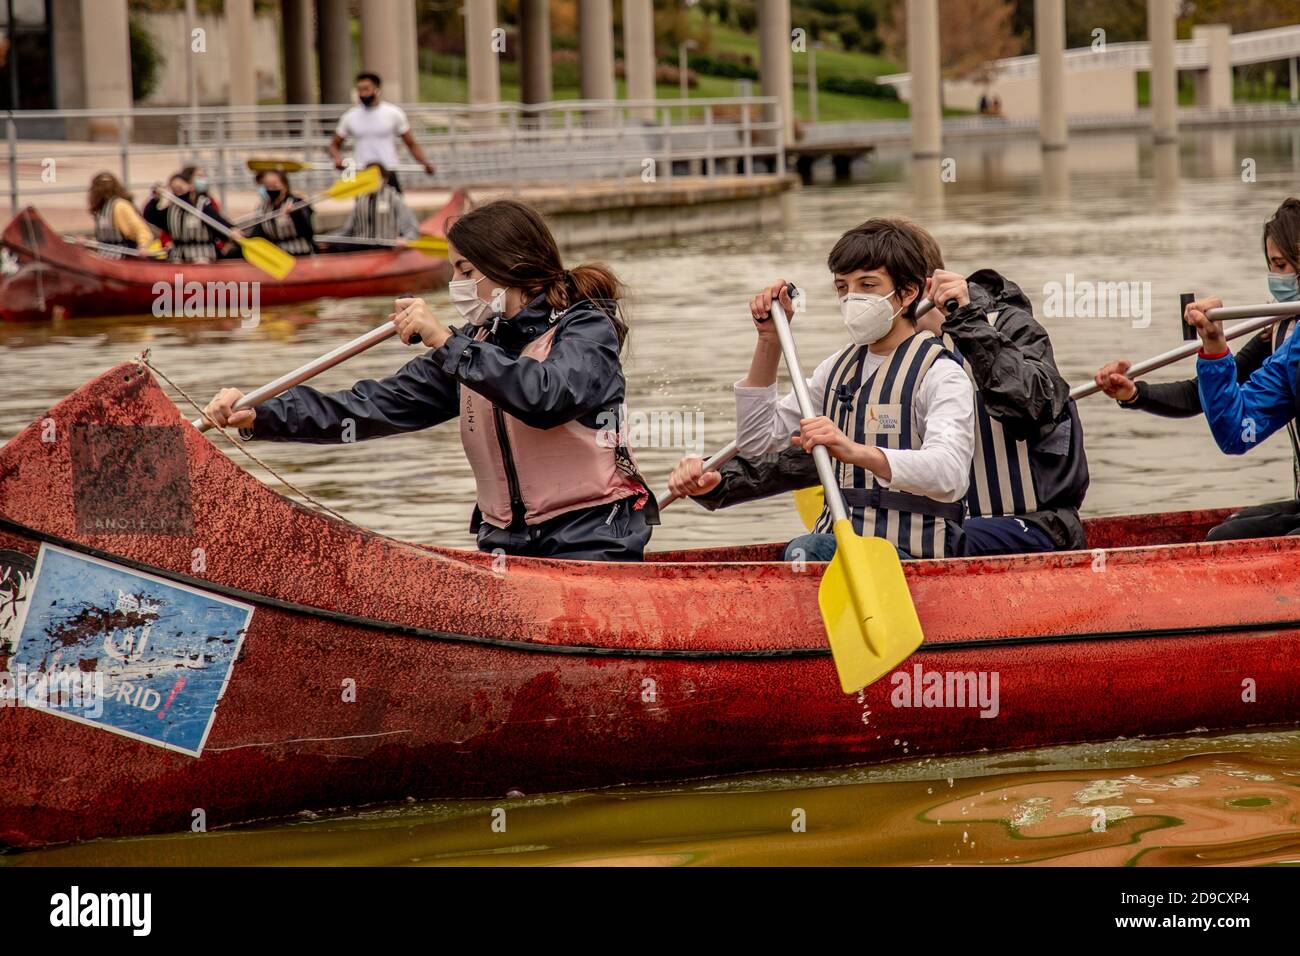 MADRID, SPAIN - Oct 30, 2020: Young people from the Queztal route practice canoeing in the park 'Juan Carlos I ' Stock Photo